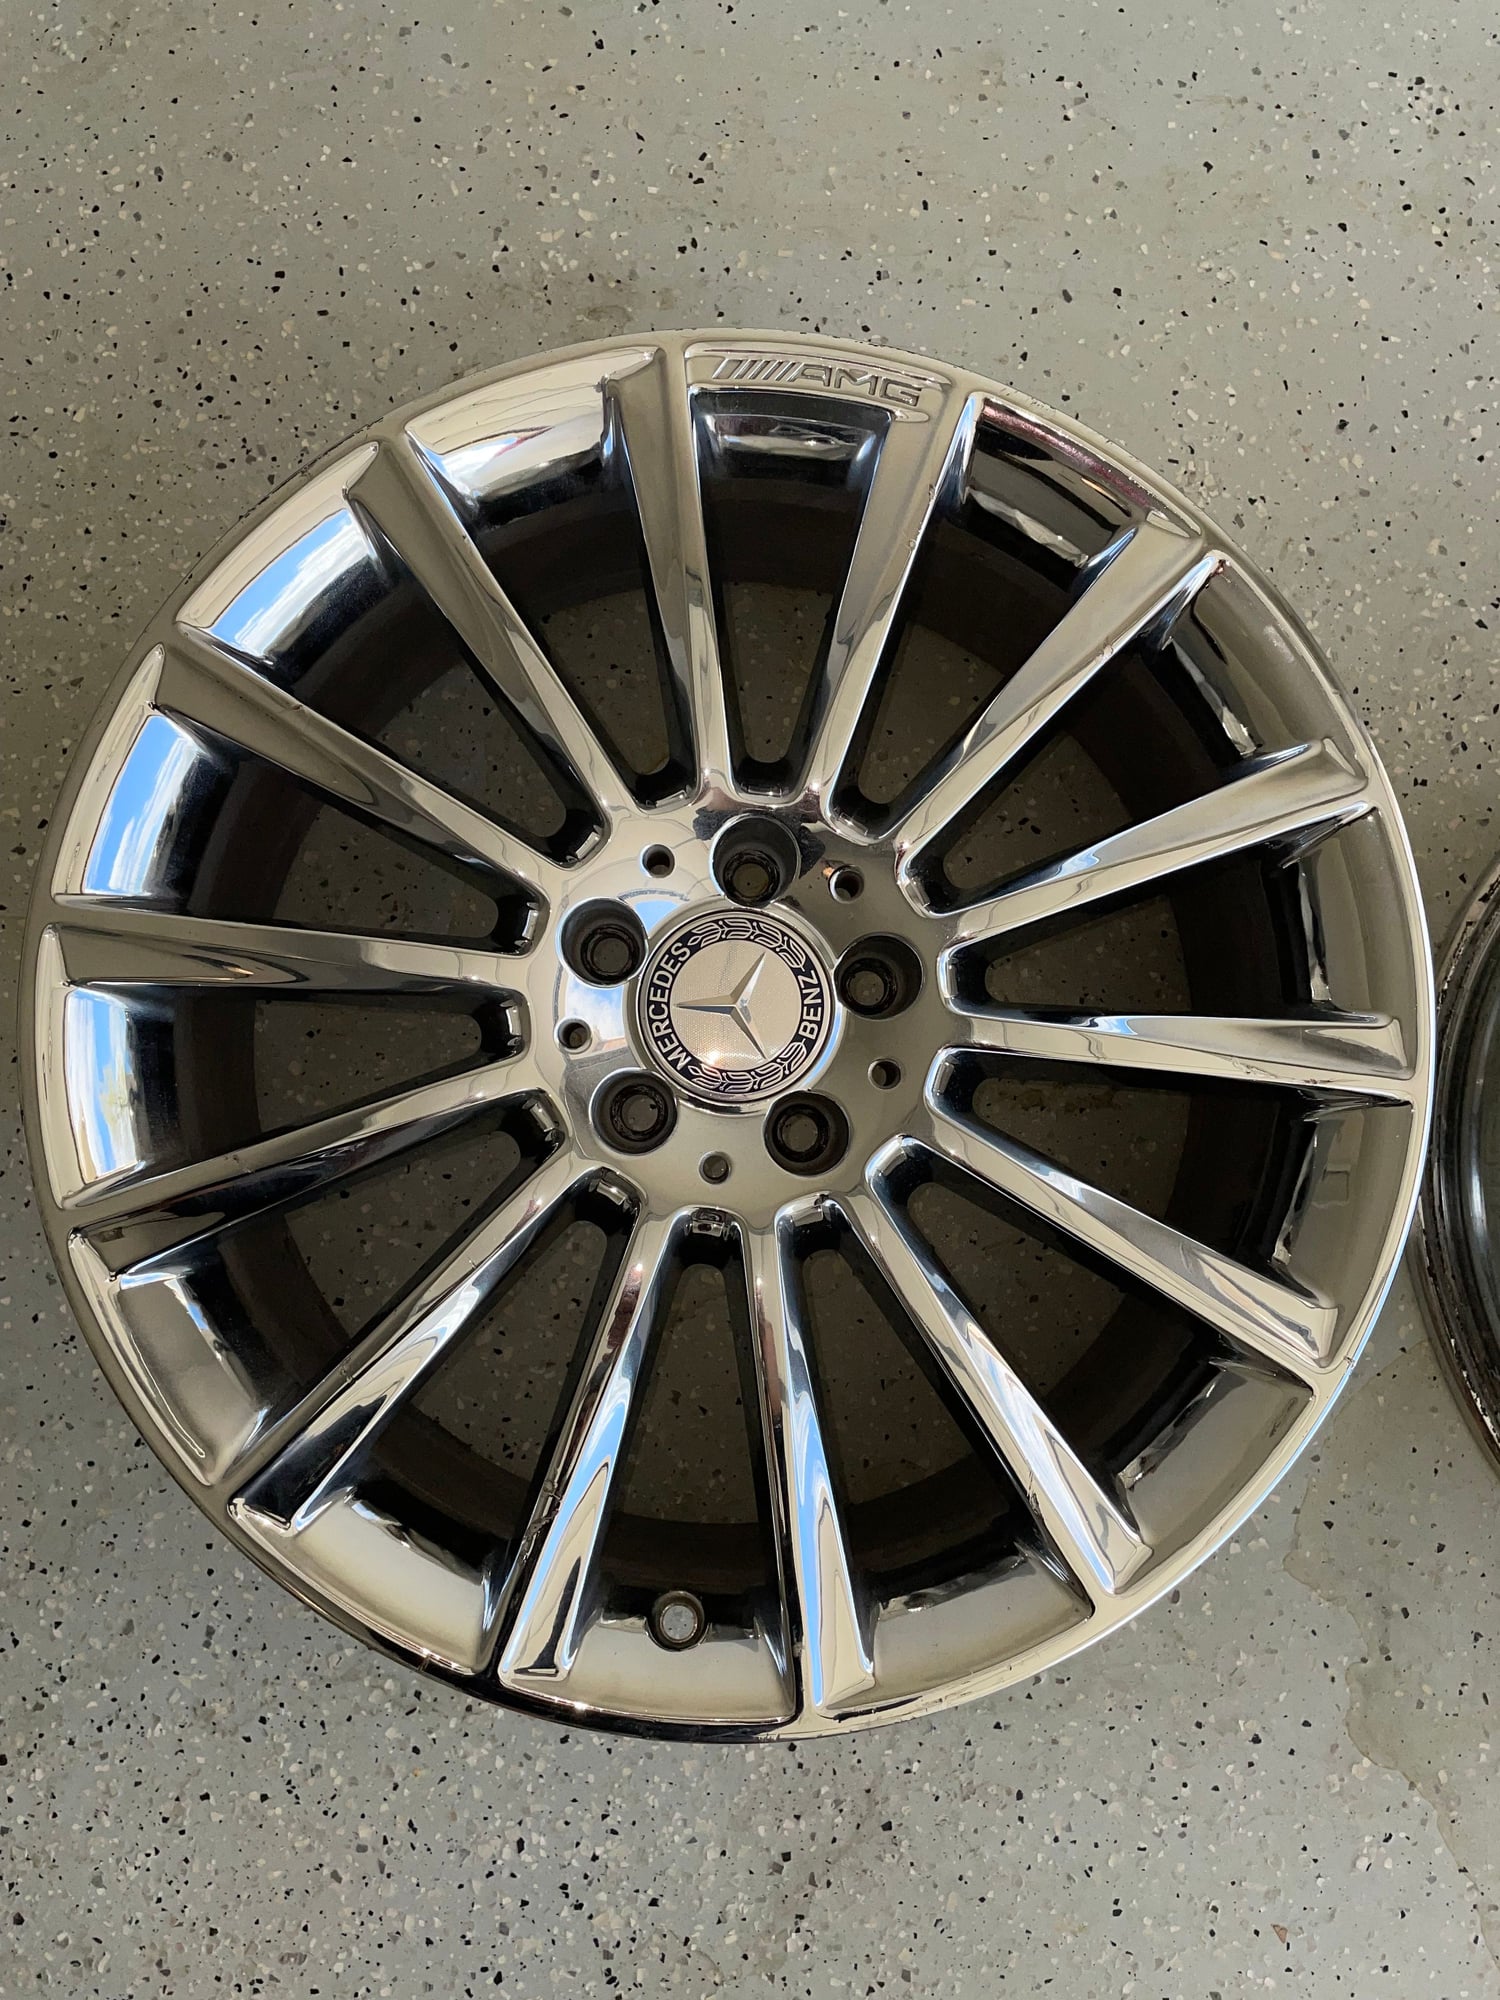 Wheels and Tires/Axles - 4x AMG 19 inch W205 C300 Multispoke Chrome Wheels - Used - 2015 to 2021 Mercedes-Benz C63 AMG - 2015 to 2021 Mercedes-Benz C-Class - Dallas, TX 75201, United States